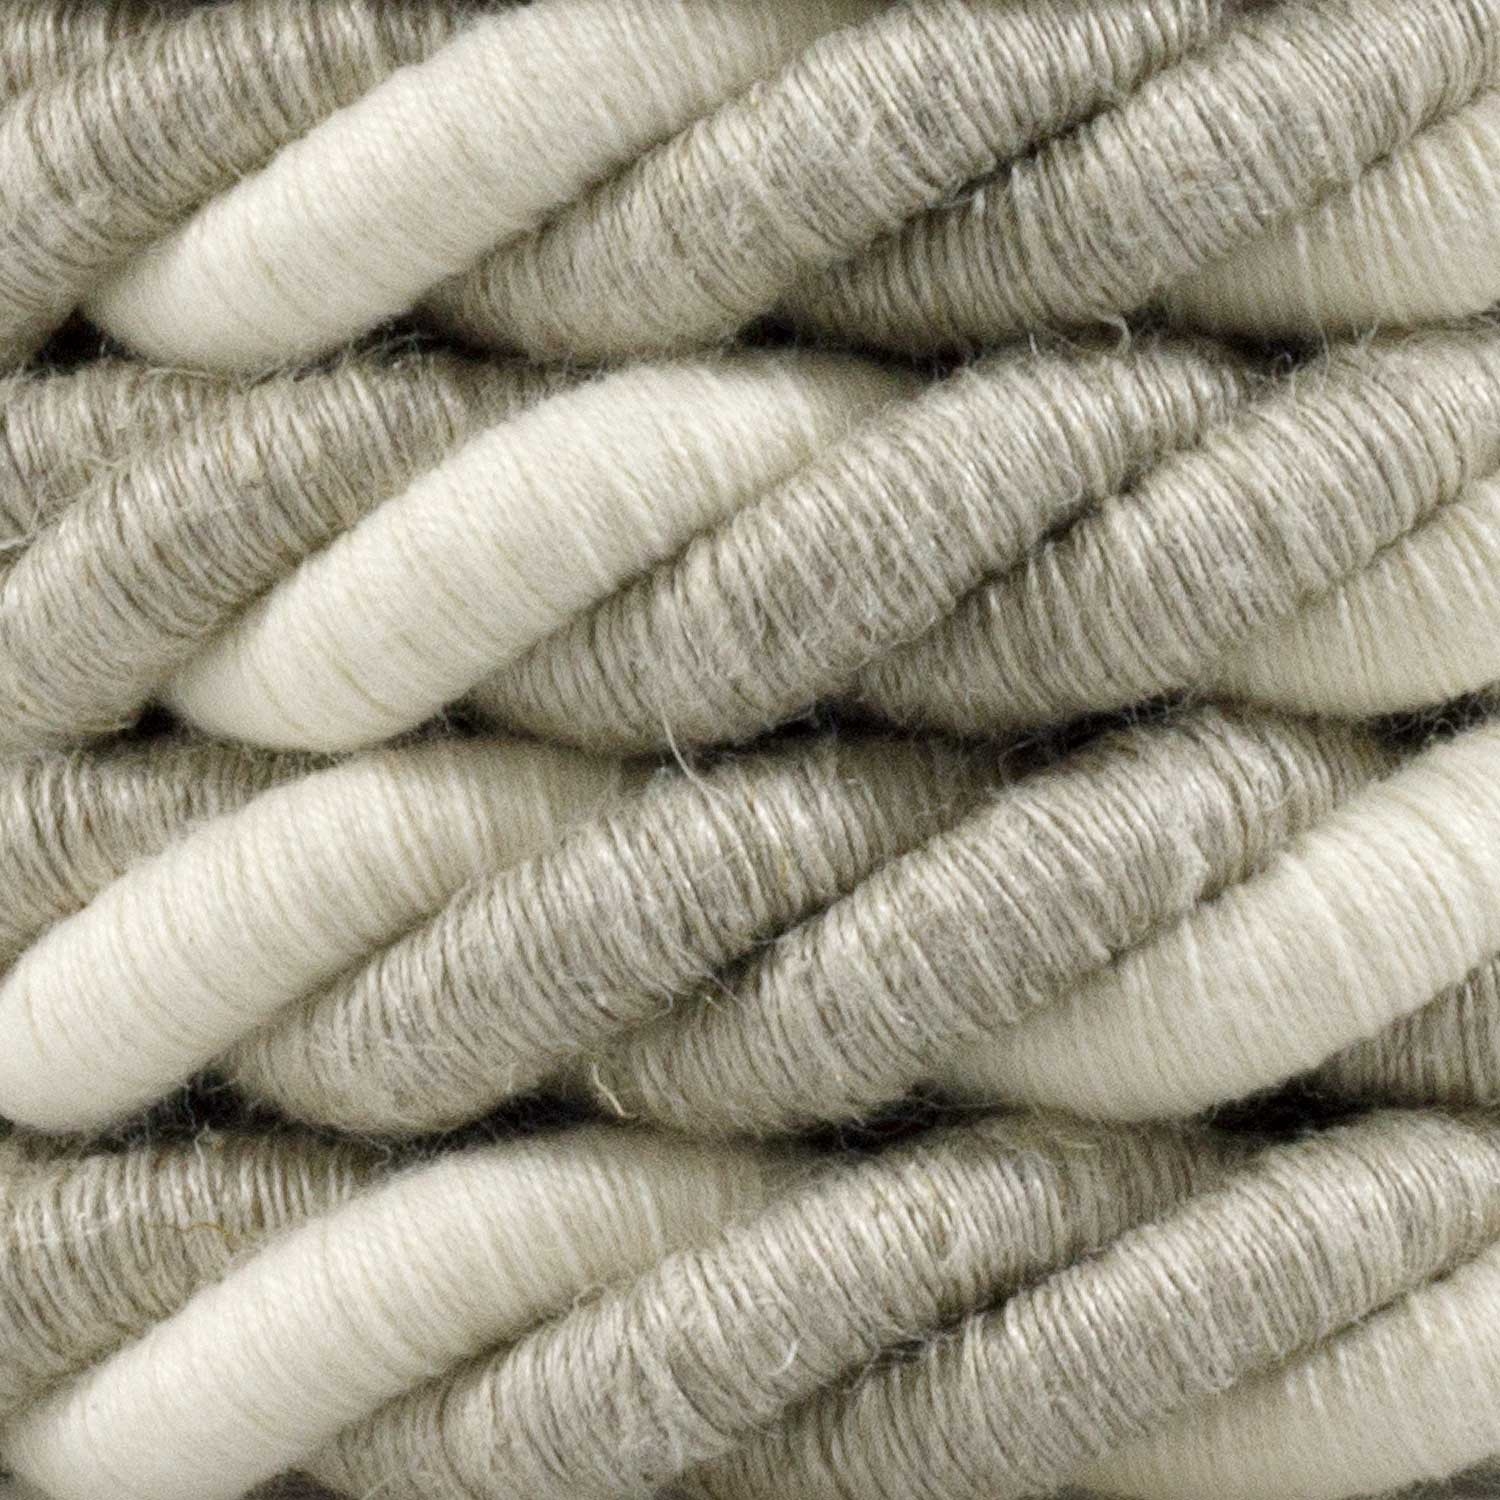 XL Rope electrical wire 18/3 AWG wire inside. Natural Linen and Raw Cotton Fabric. 16mm.